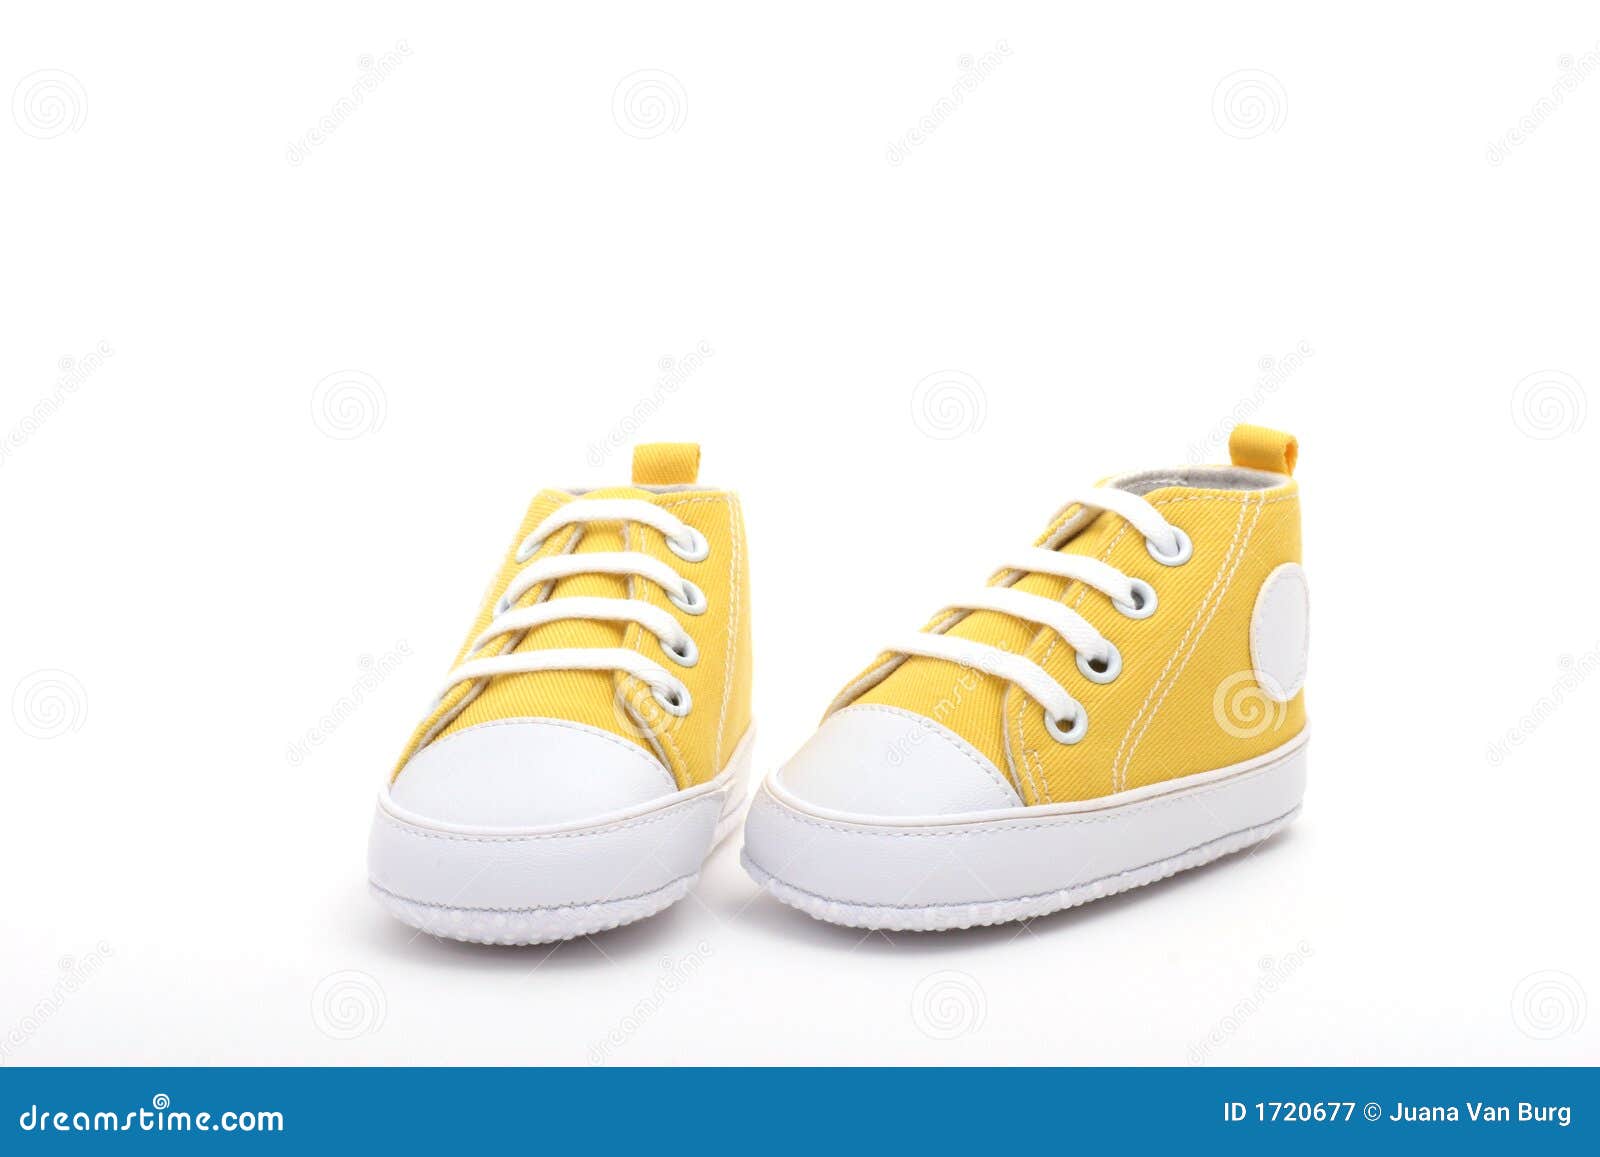 Yellow shoes stock image. Image of style, yellow, laces - 1720677